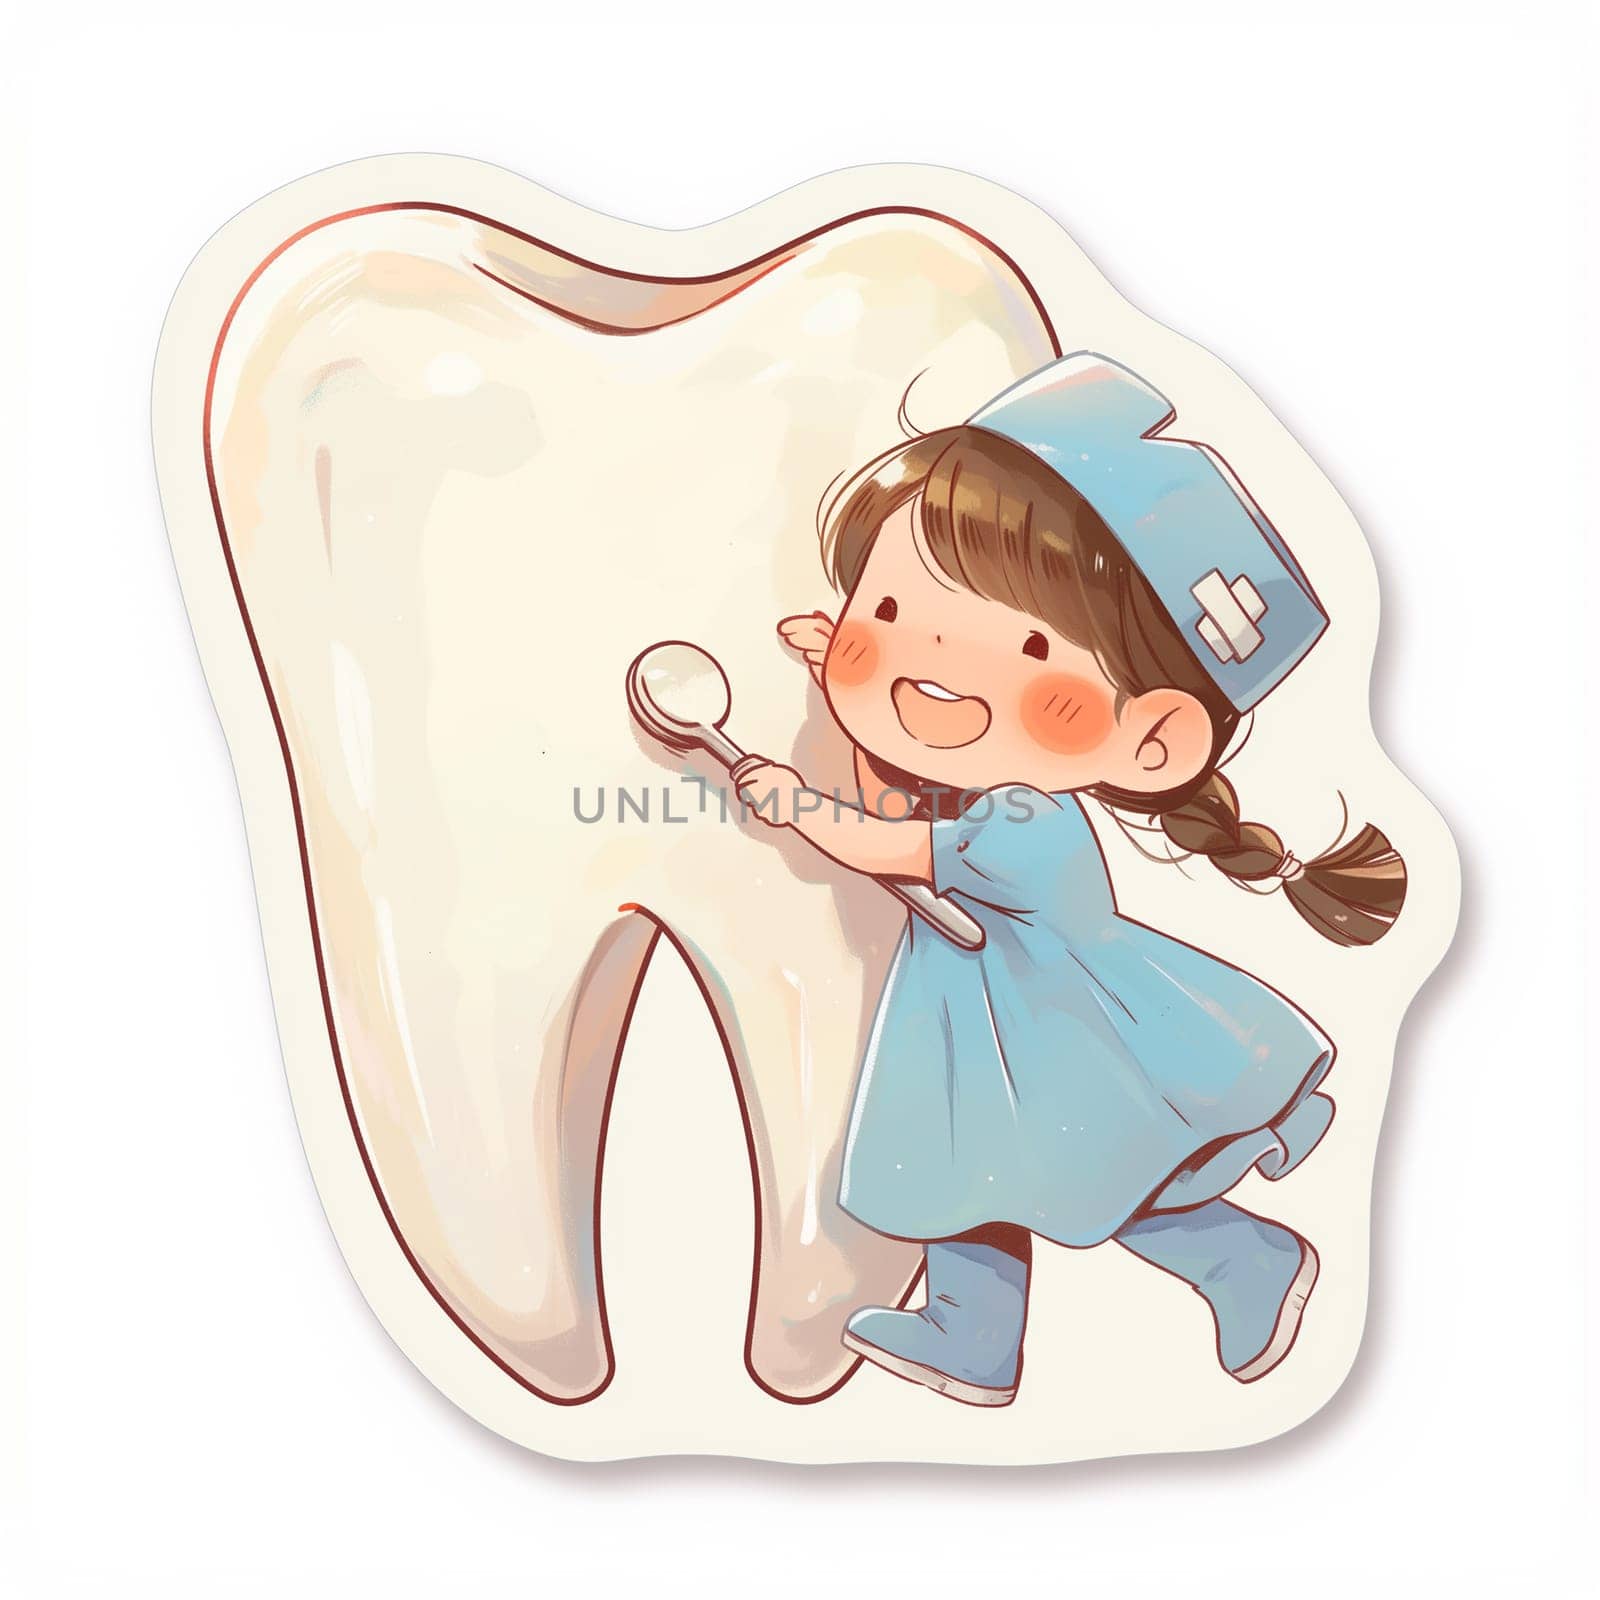 A cute cartoon girl dressed as a dentist examines a large cartoon tooth with a mirror.